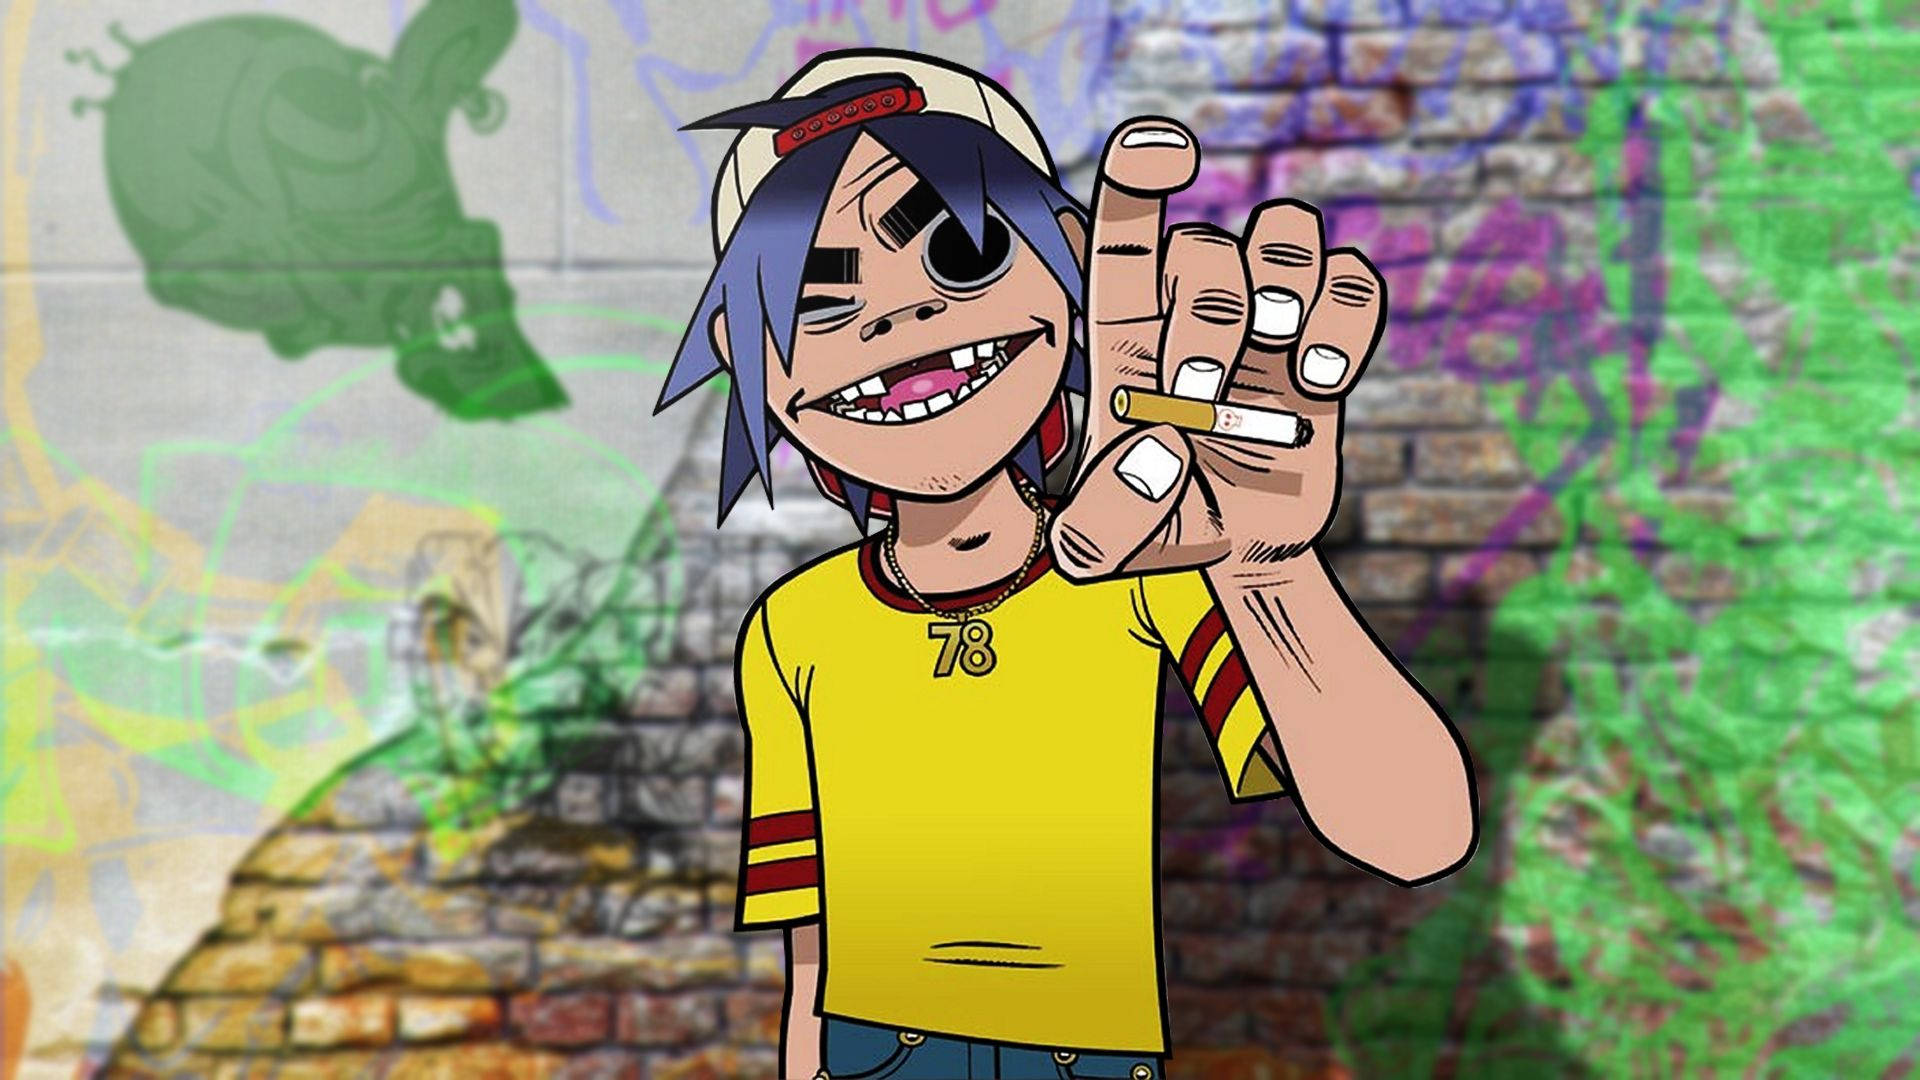 Gorillaz 1920X1080 Wallpaper and Background Image